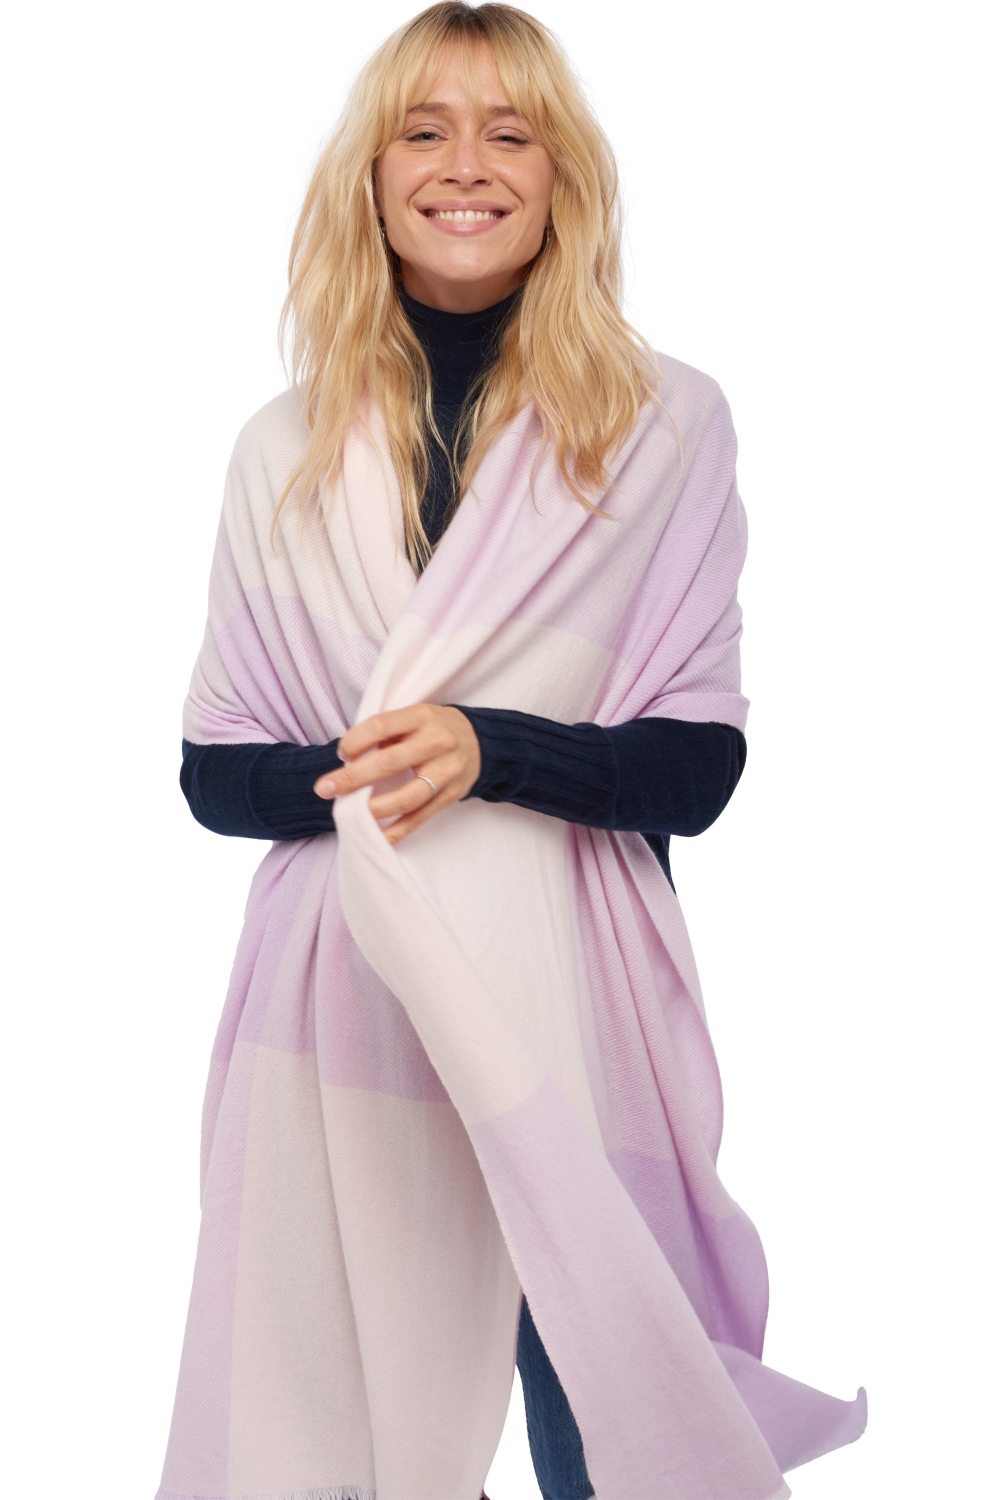 Cashmere accessories scarves mufflers verona lilas shinking violet 225 x 75 cm